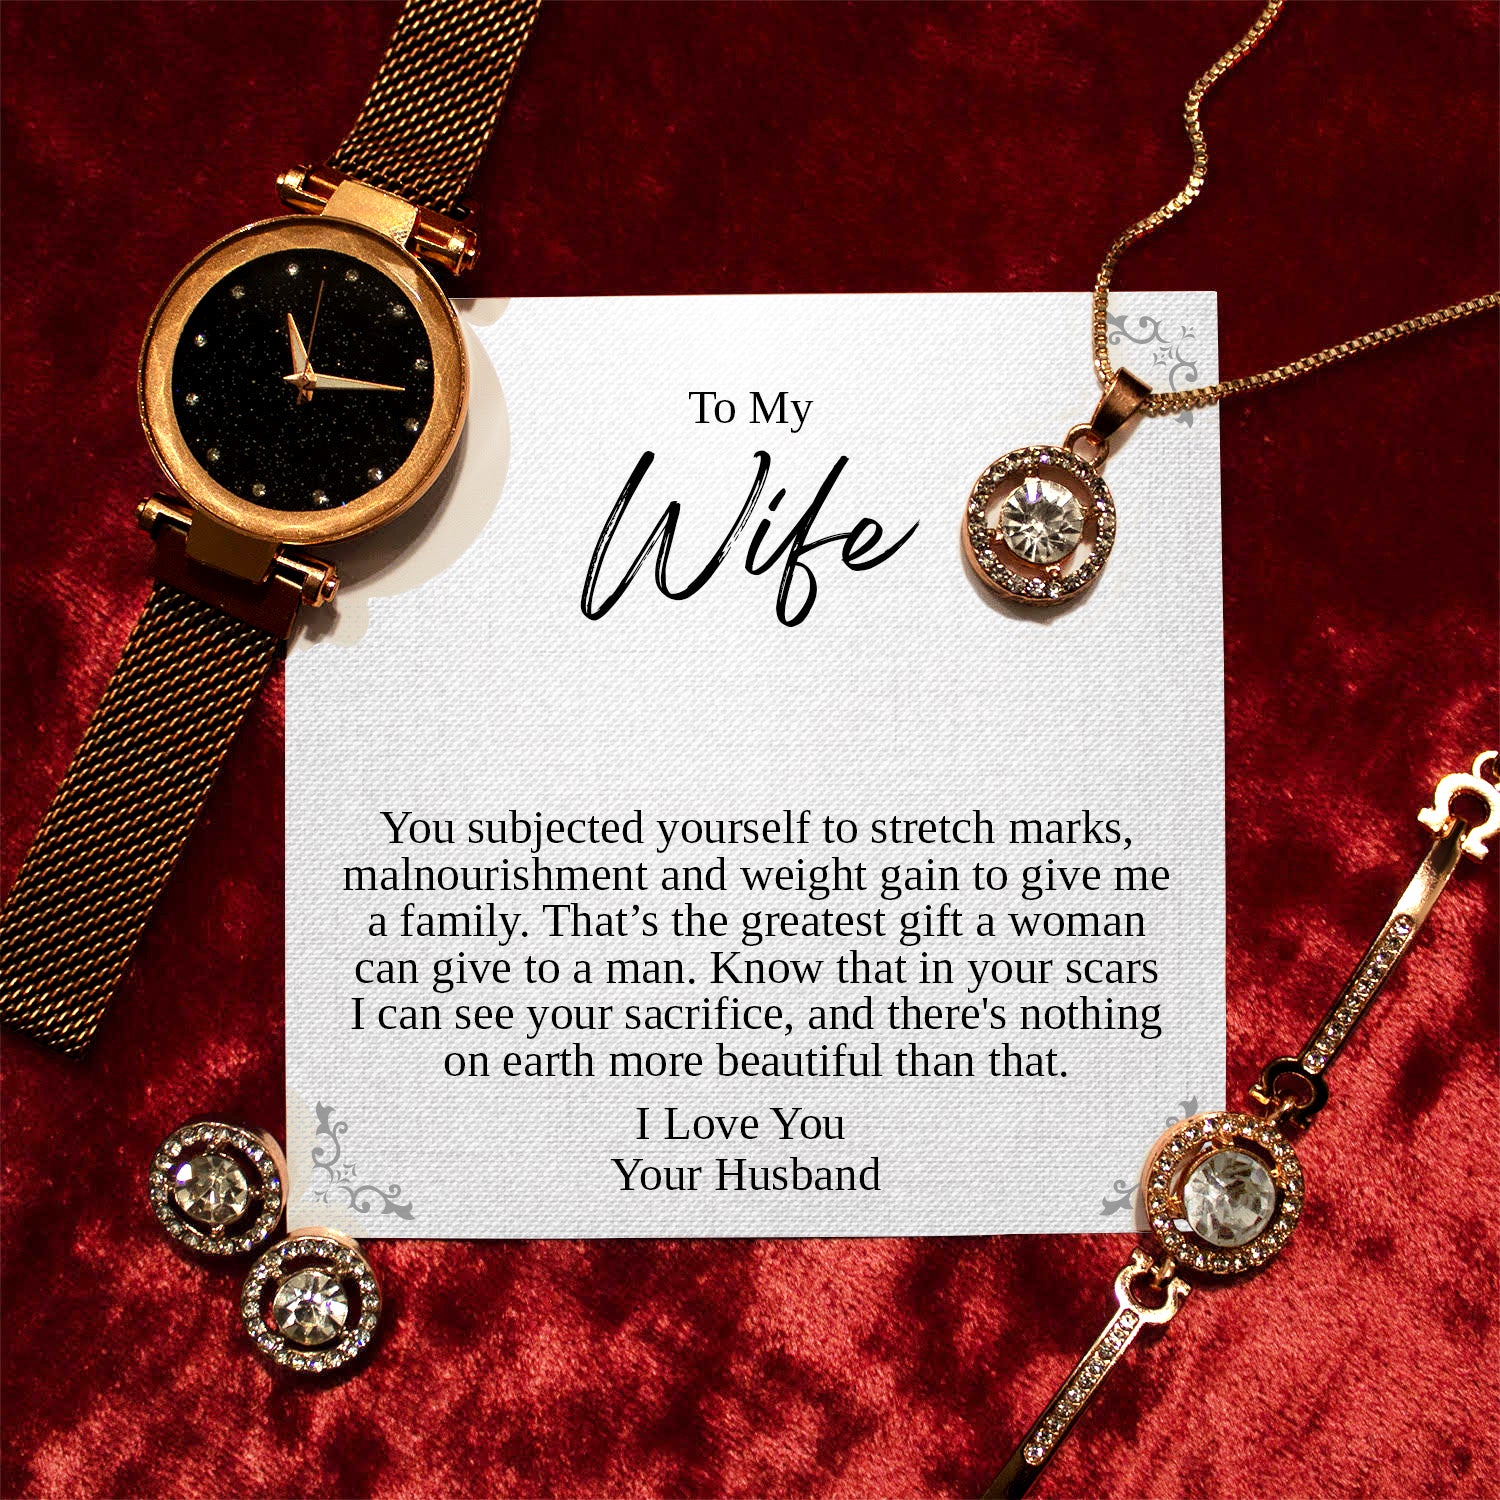 To My Wife | "The Greatest Gift" | Cosmopolitan Set